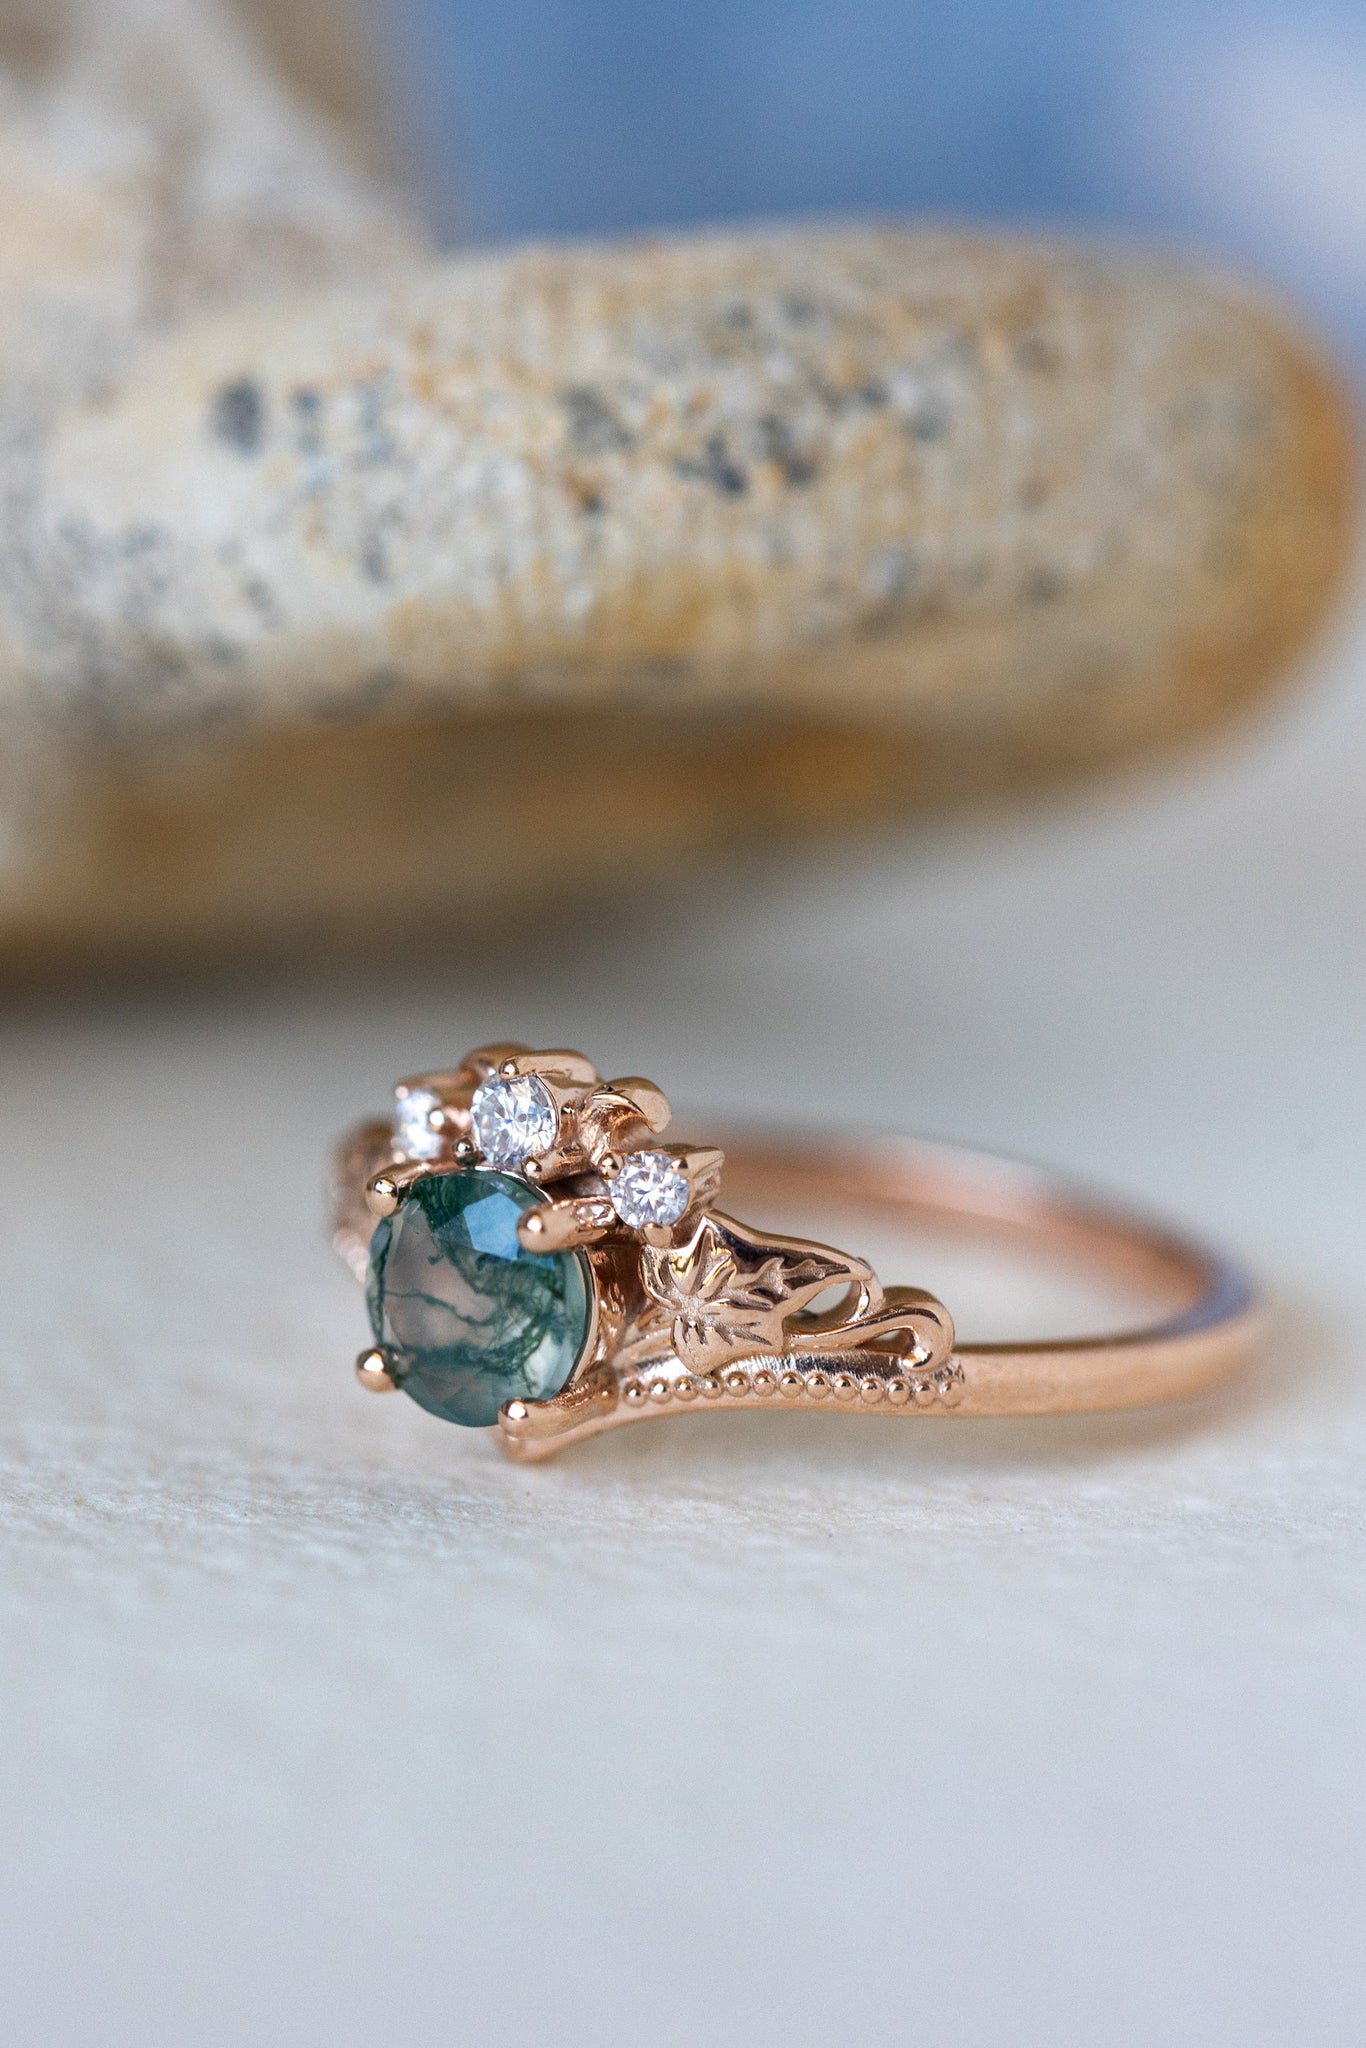 READY TO SHIP: Ariadne bridal ring set in 14K or 18K rose gold, natural moss agate 5 mm, accents moissanites, AVAILABLE RING SIZES: 4.5-11US - Eden Garden Jewelry™